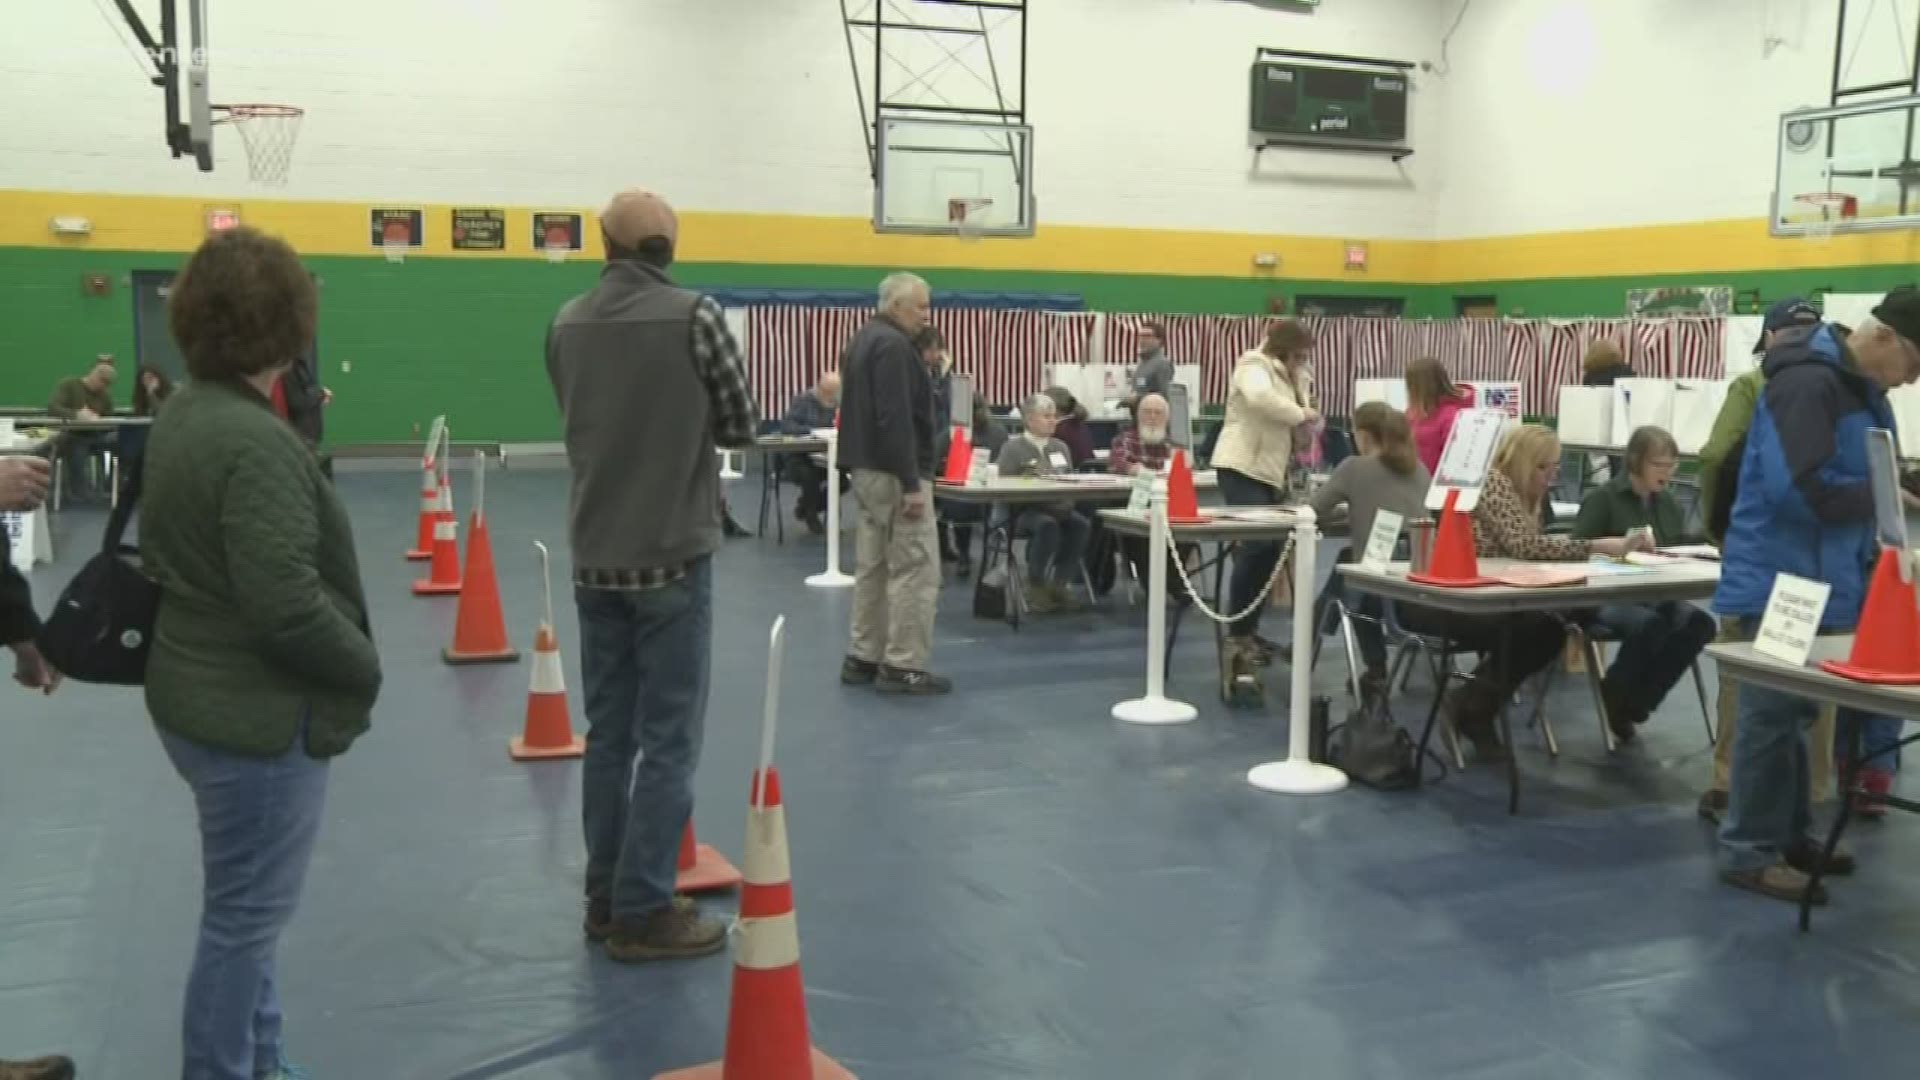 New Hampshire voters ready and eager for voices to be heard